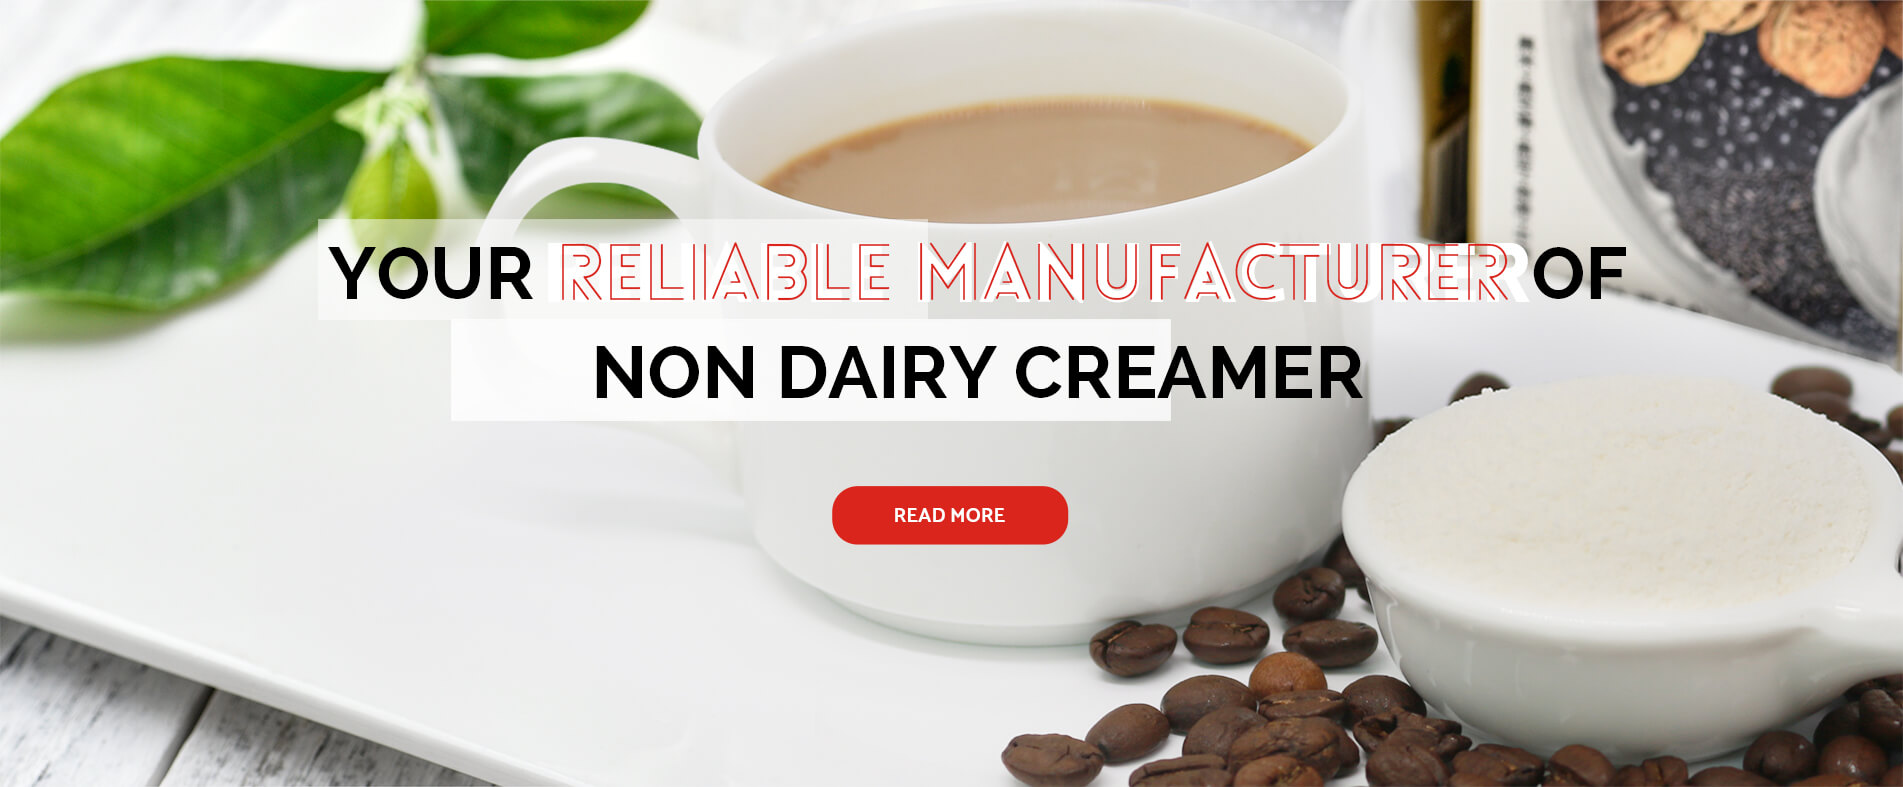 Non Dairy Creamers Manufacturer